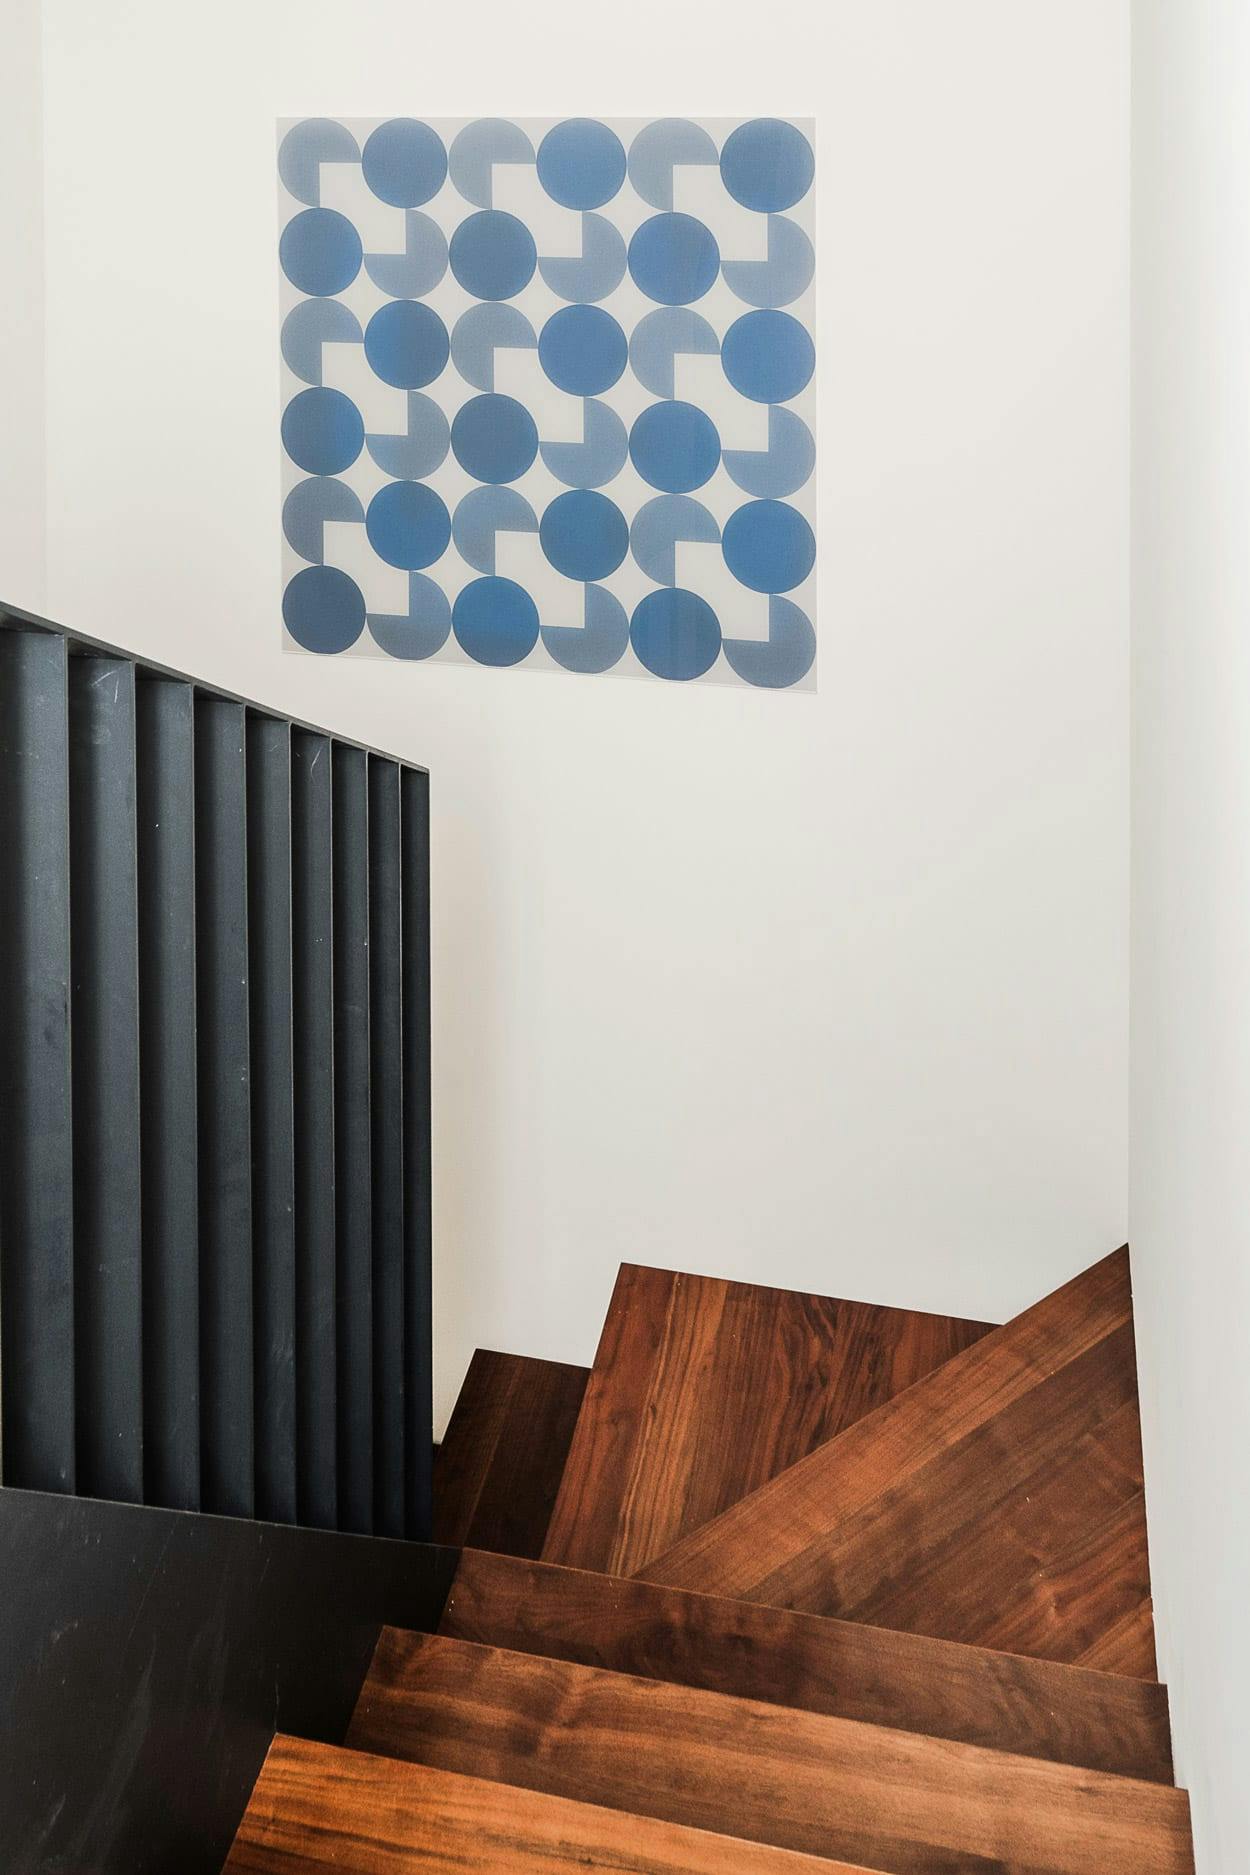 A large wooden staircase with a black railing is situated next to a wall with a blue and white patterned wallpaper.